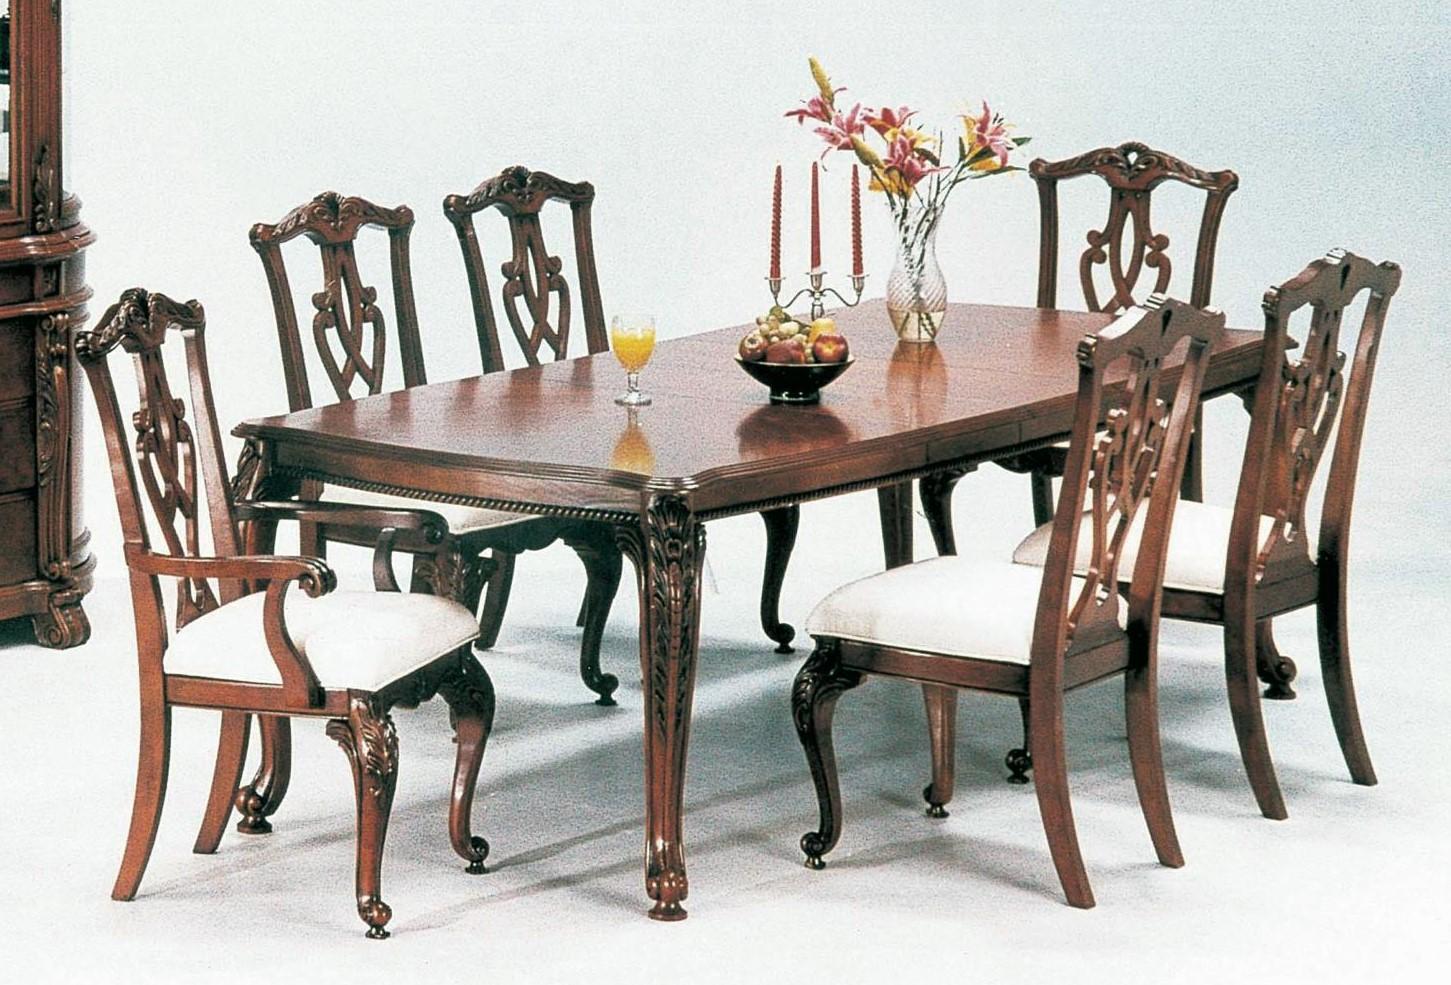 

    
MYCO Furniture Charity Traditional Cherry Finish Carved Wood Dining Room Set 7Pc
